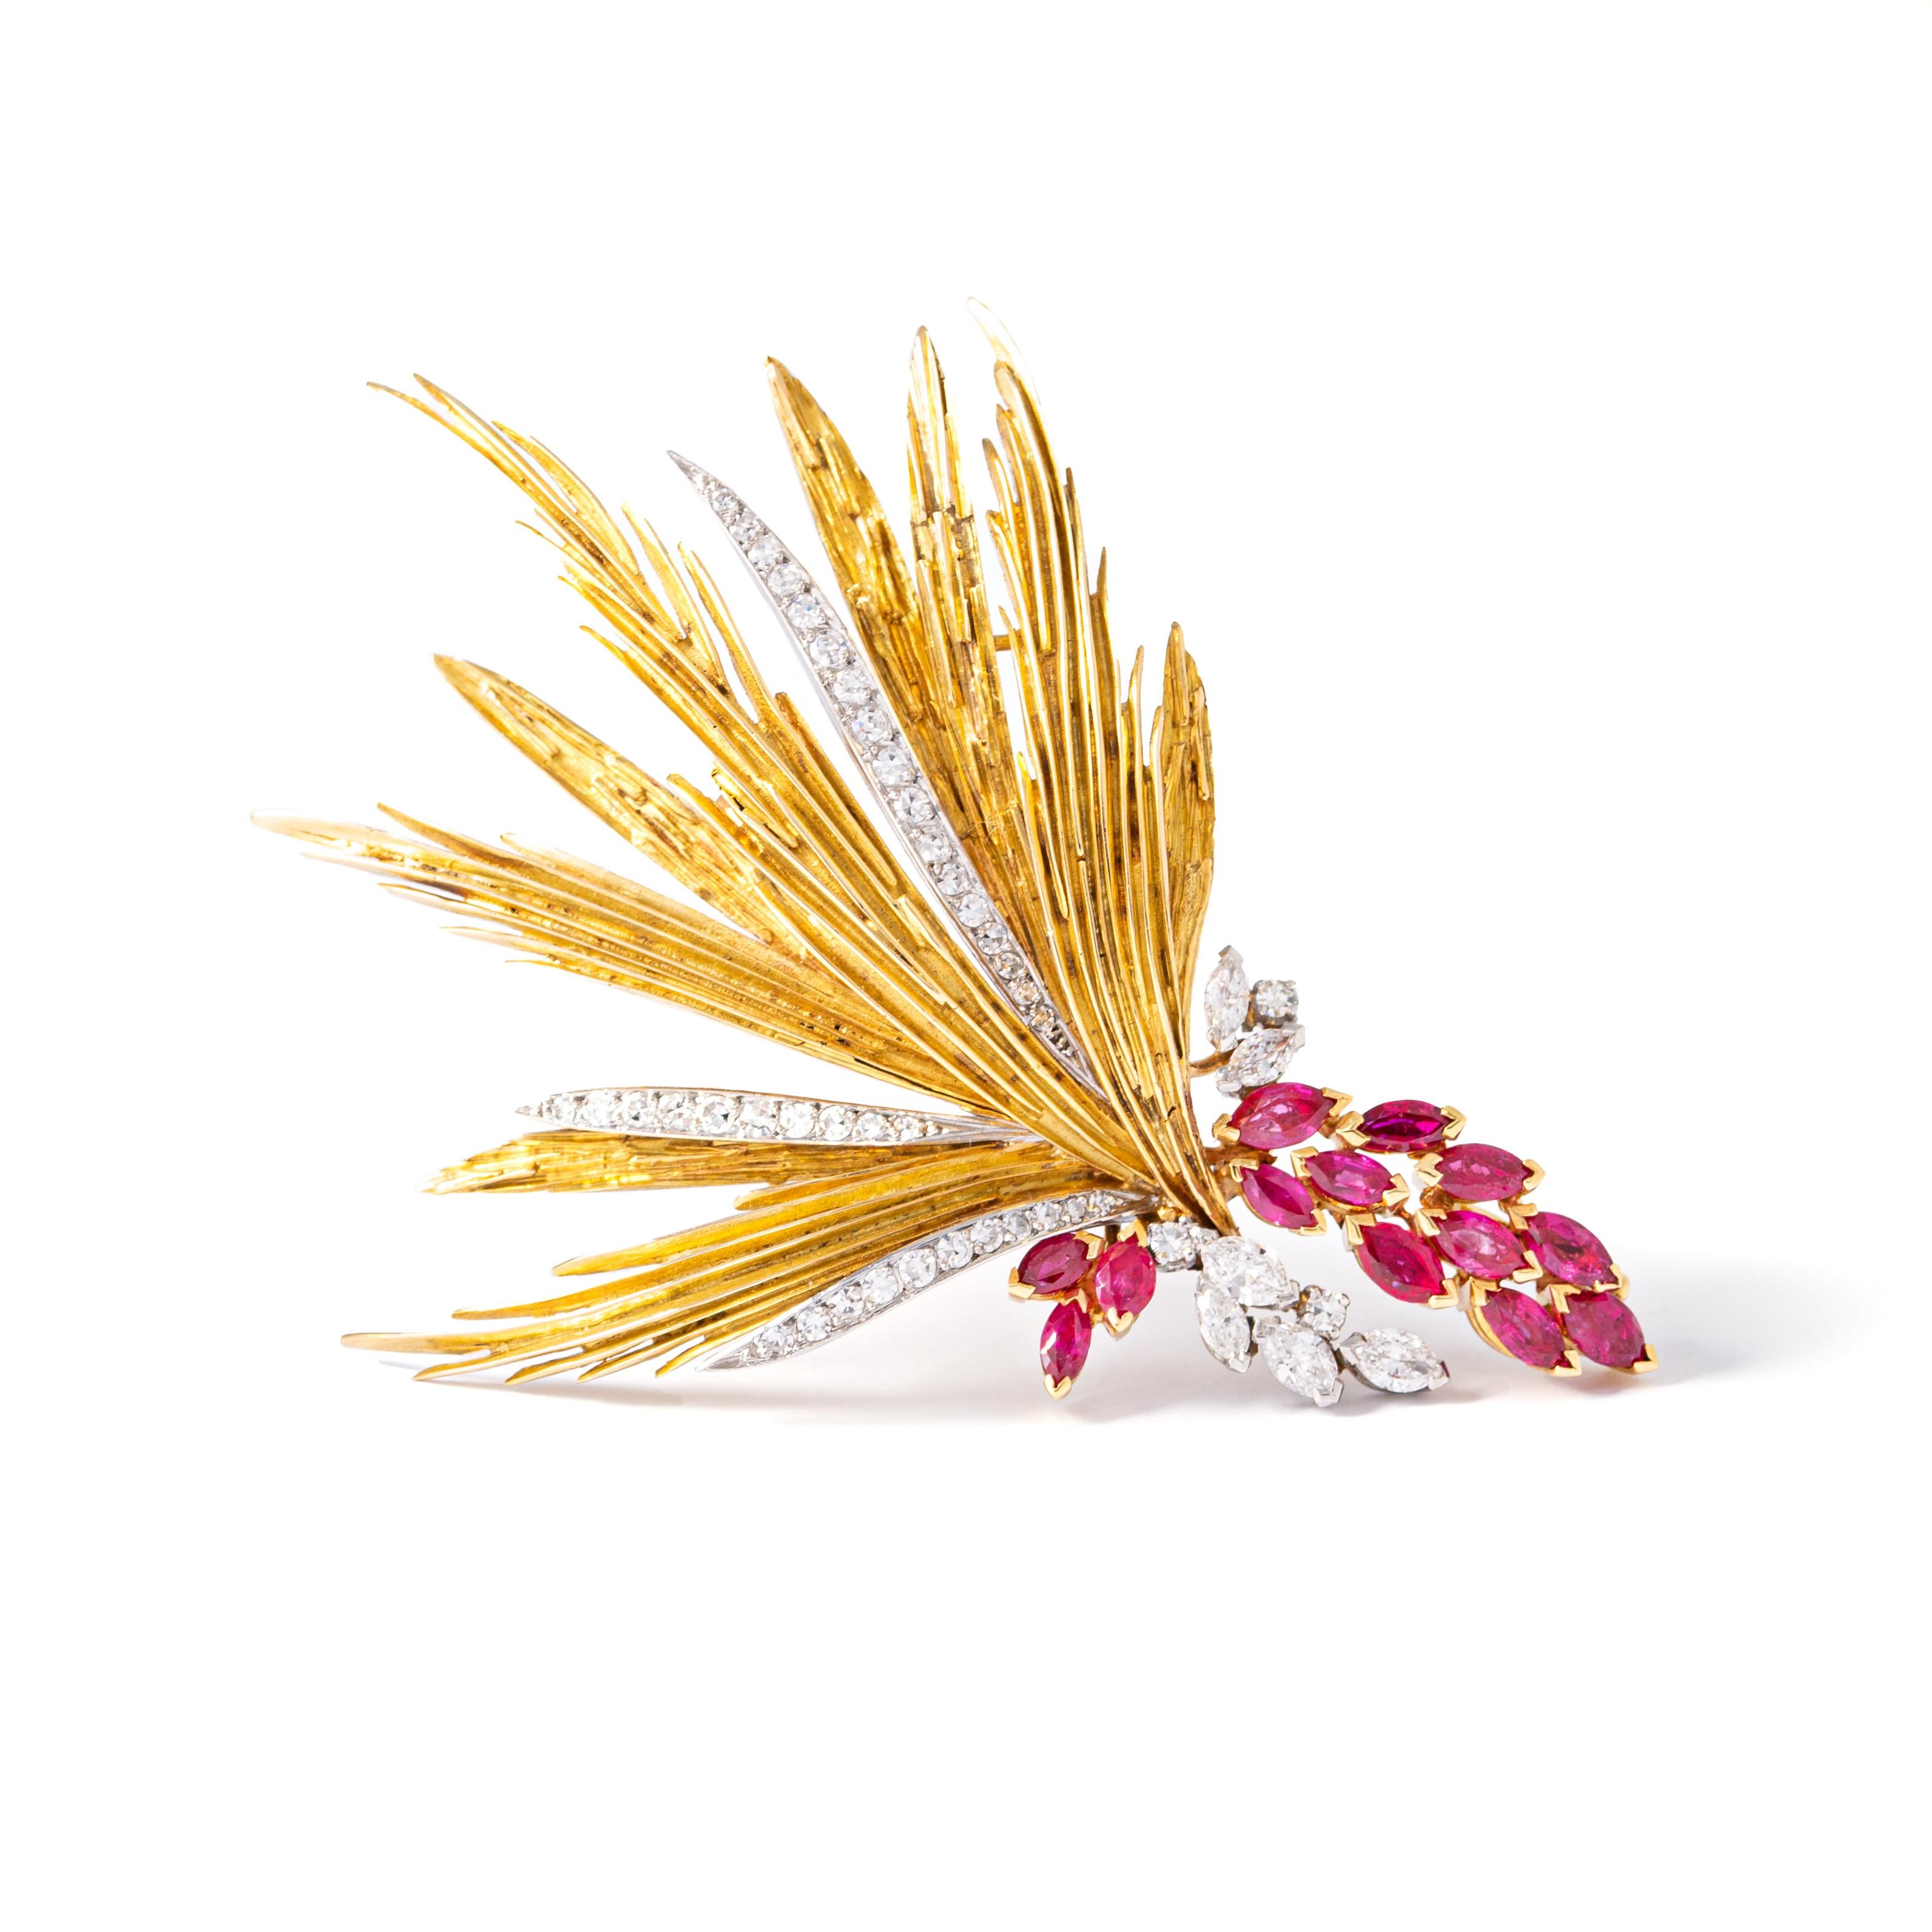 Aesthetic Movement Mellerio Dits Meller Diamond Ruby Yellow Brooch 18k Brooch, 1960s For Sale